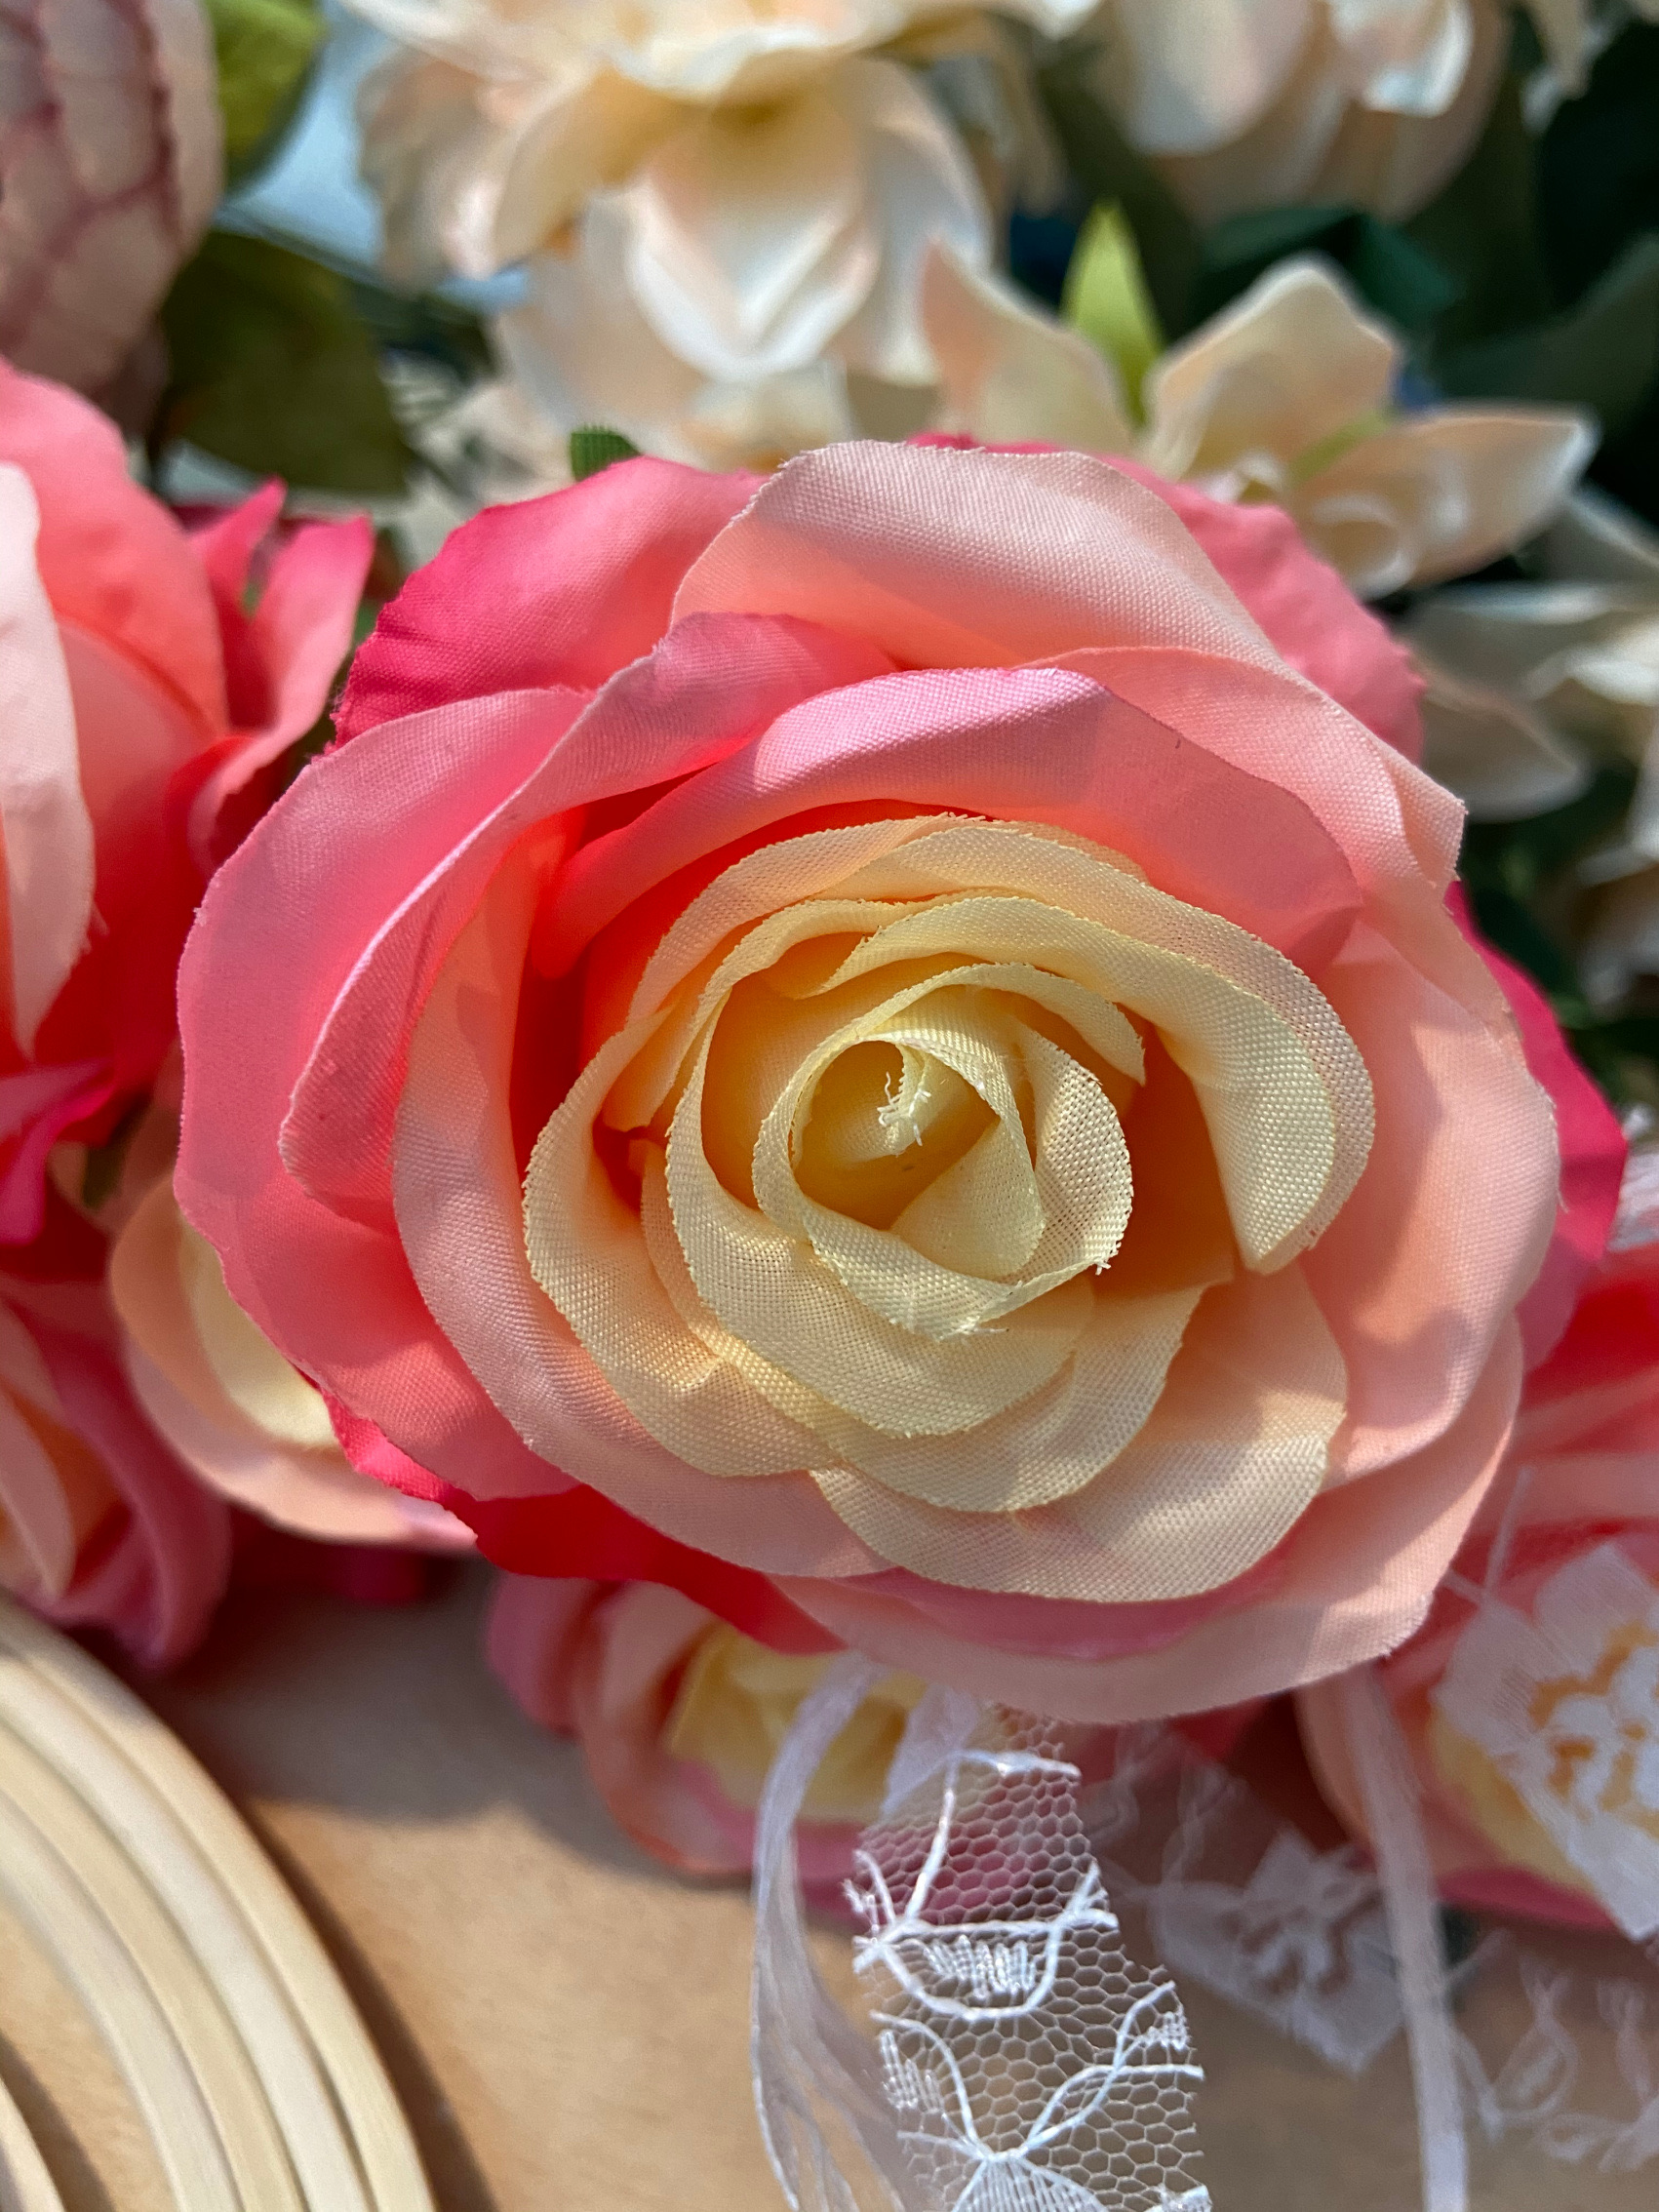 Choose beautiful pink wedding roses for all your wedding flowers, bouquets and decorations.